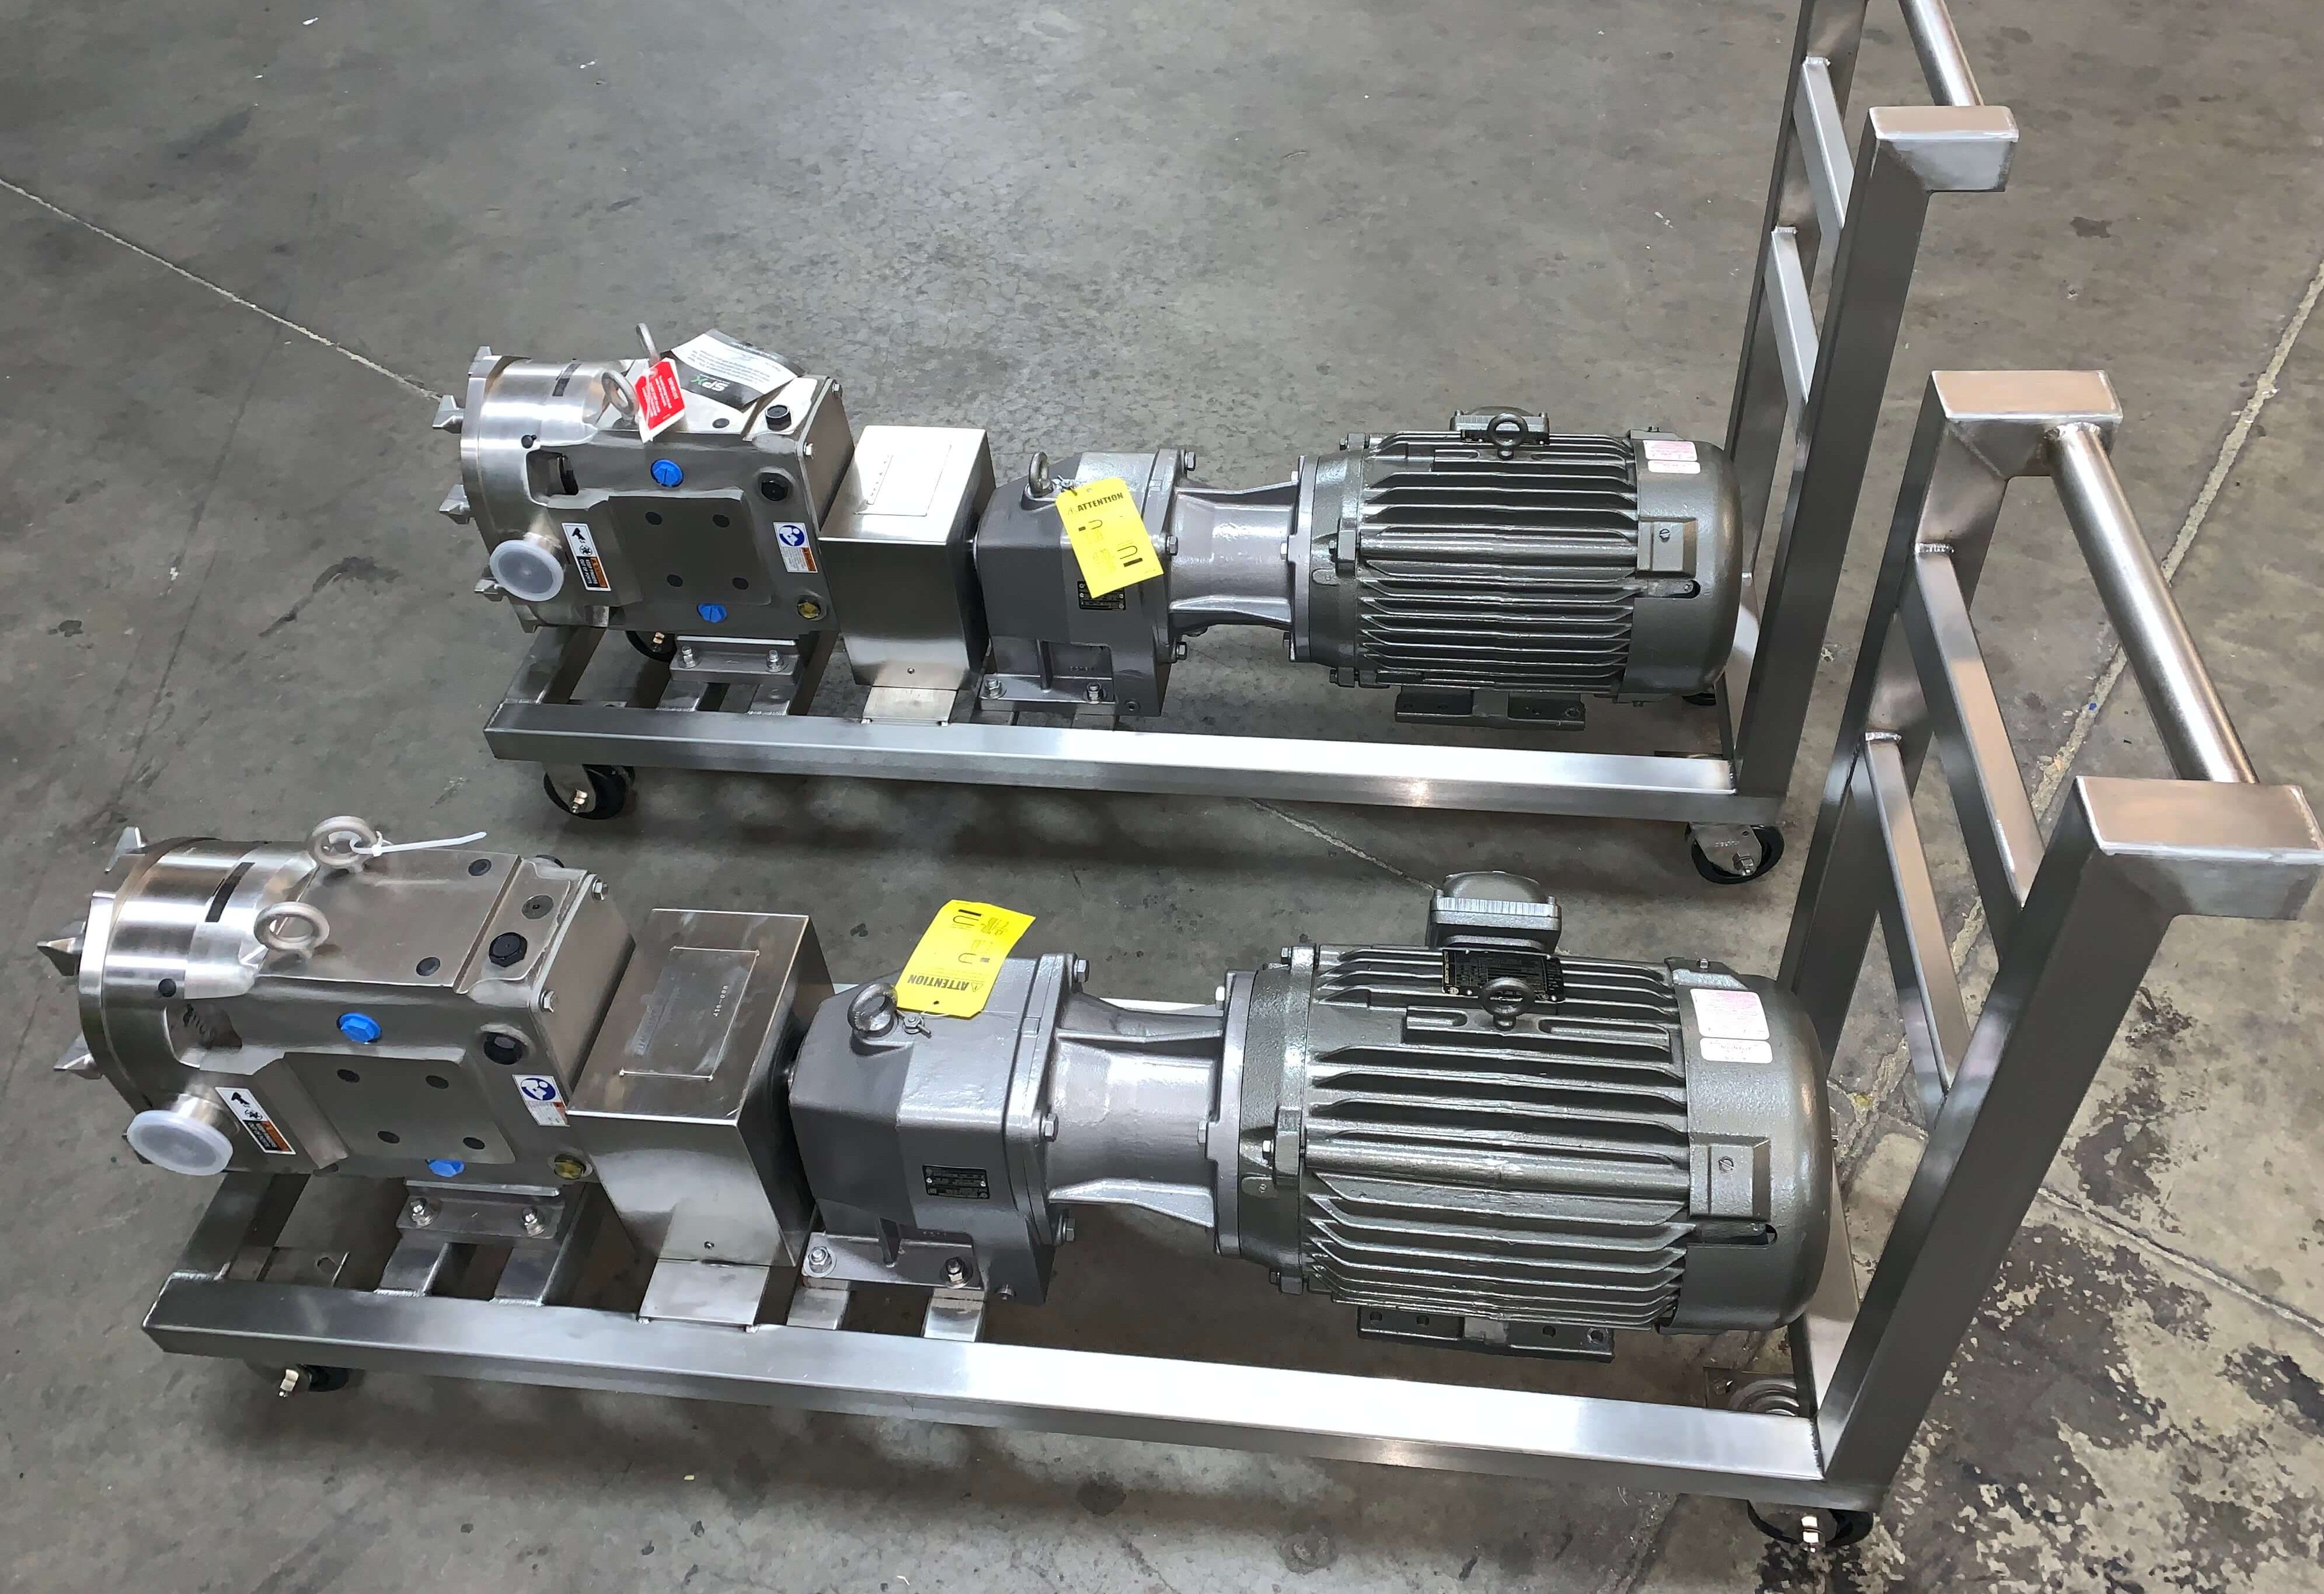 SPX Flow Sanitary Pump Carts done by Cummins-Wagner-Florida